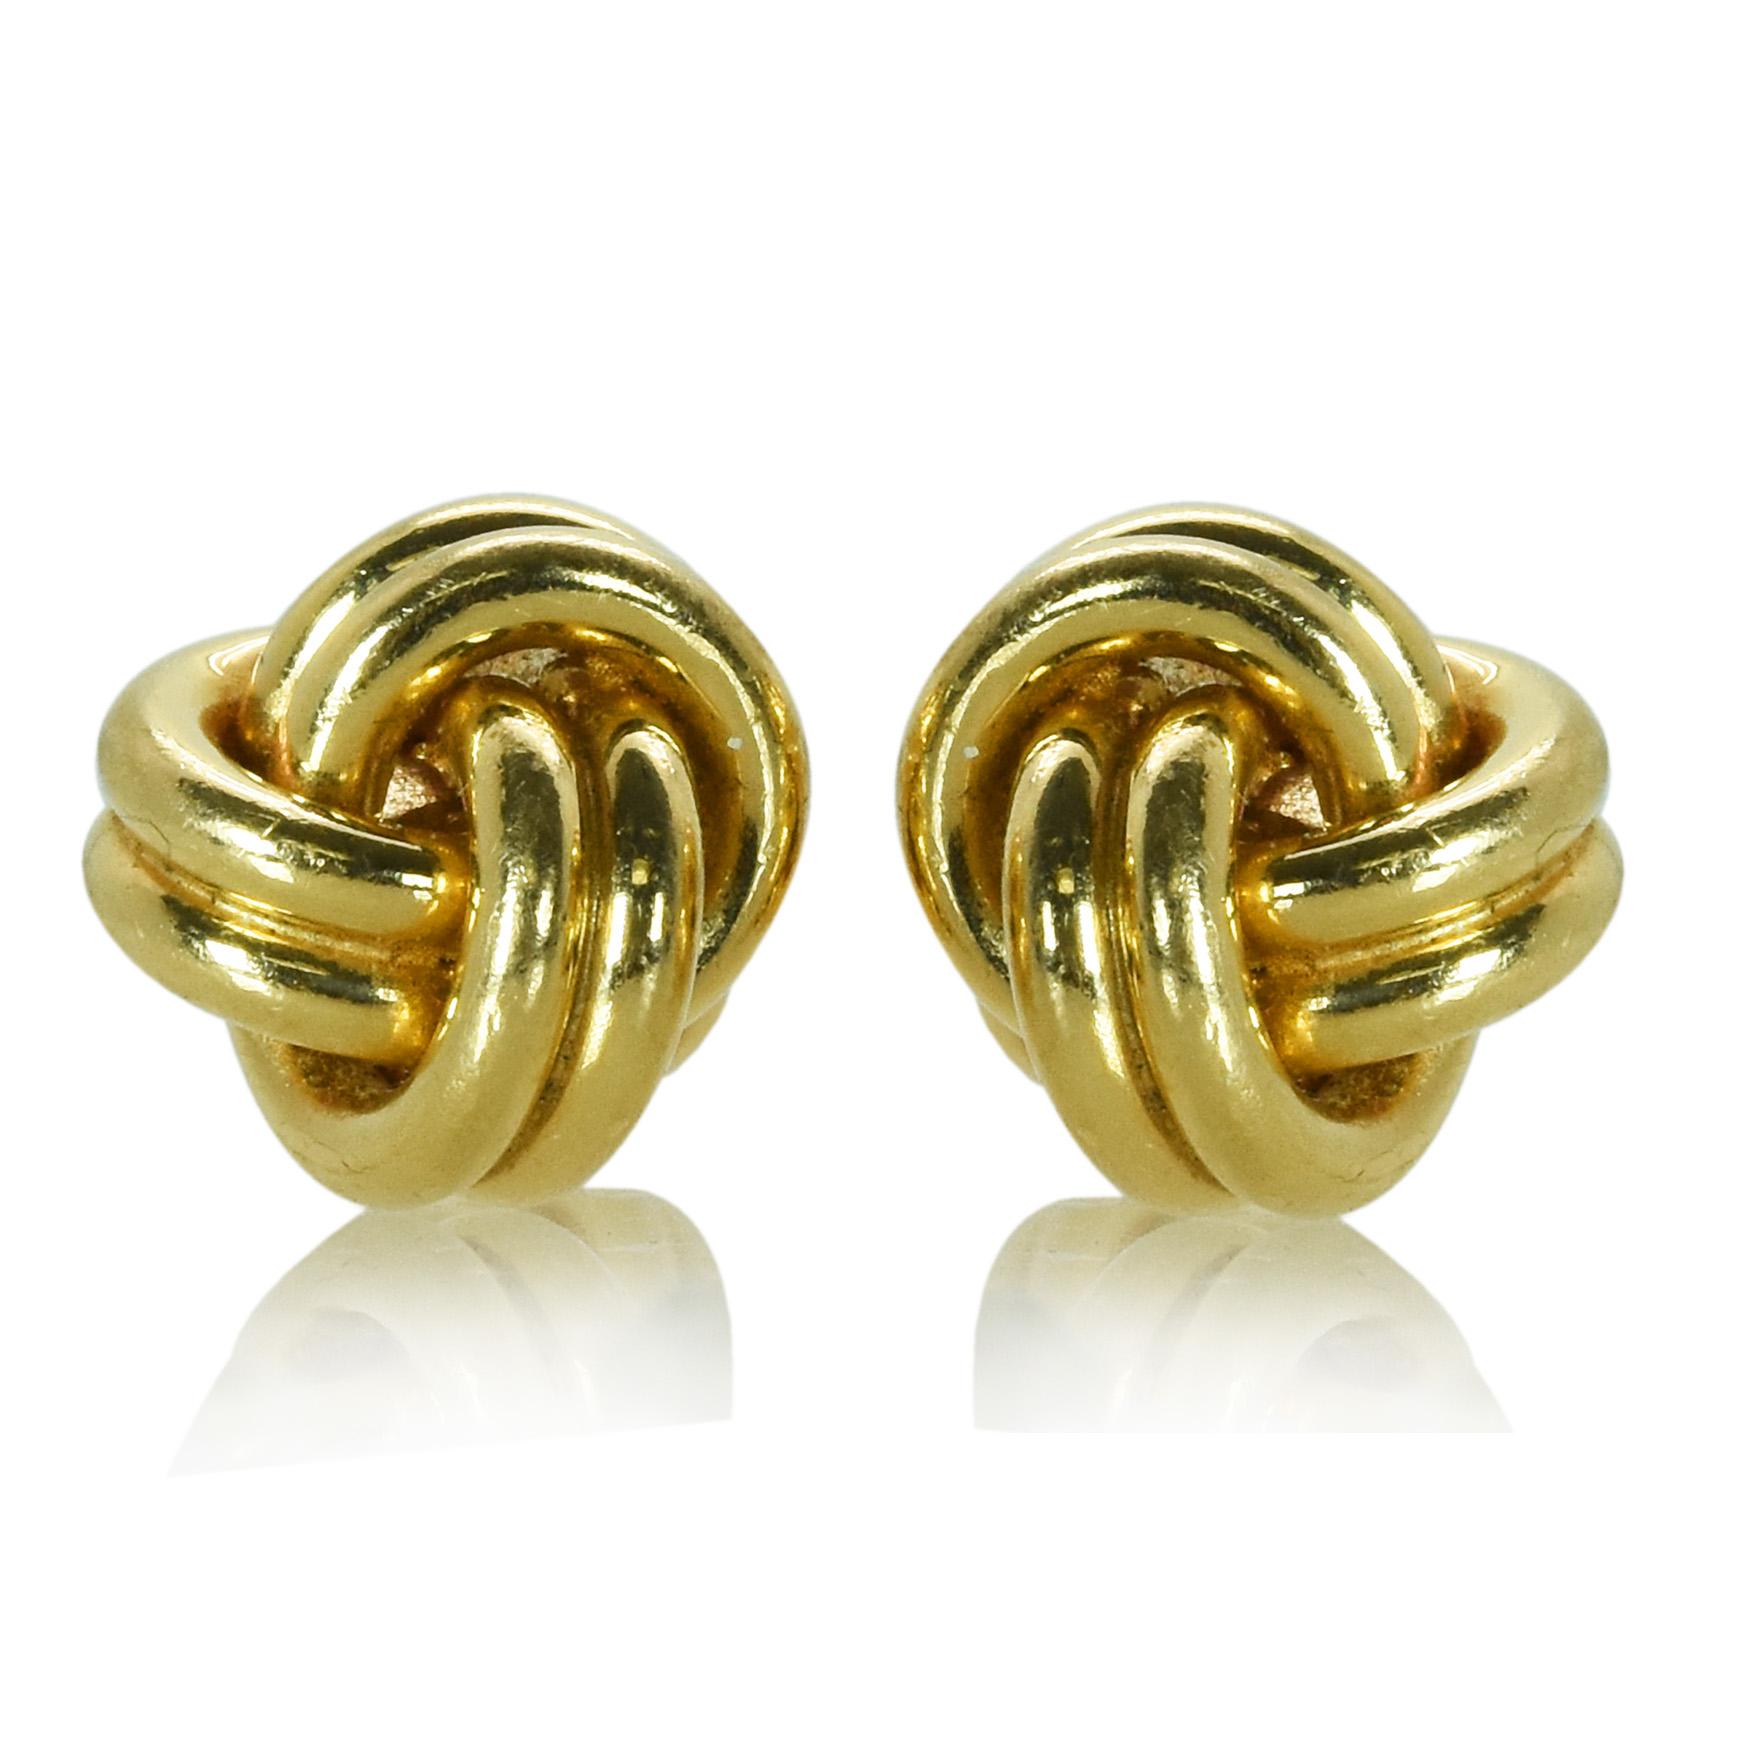 A pair of yellow gold cufflinks by Tiffany & Co. The cufflinks are in a knot motif and made in 14k yellow gold. They are signed by Tiffany & Co. 
